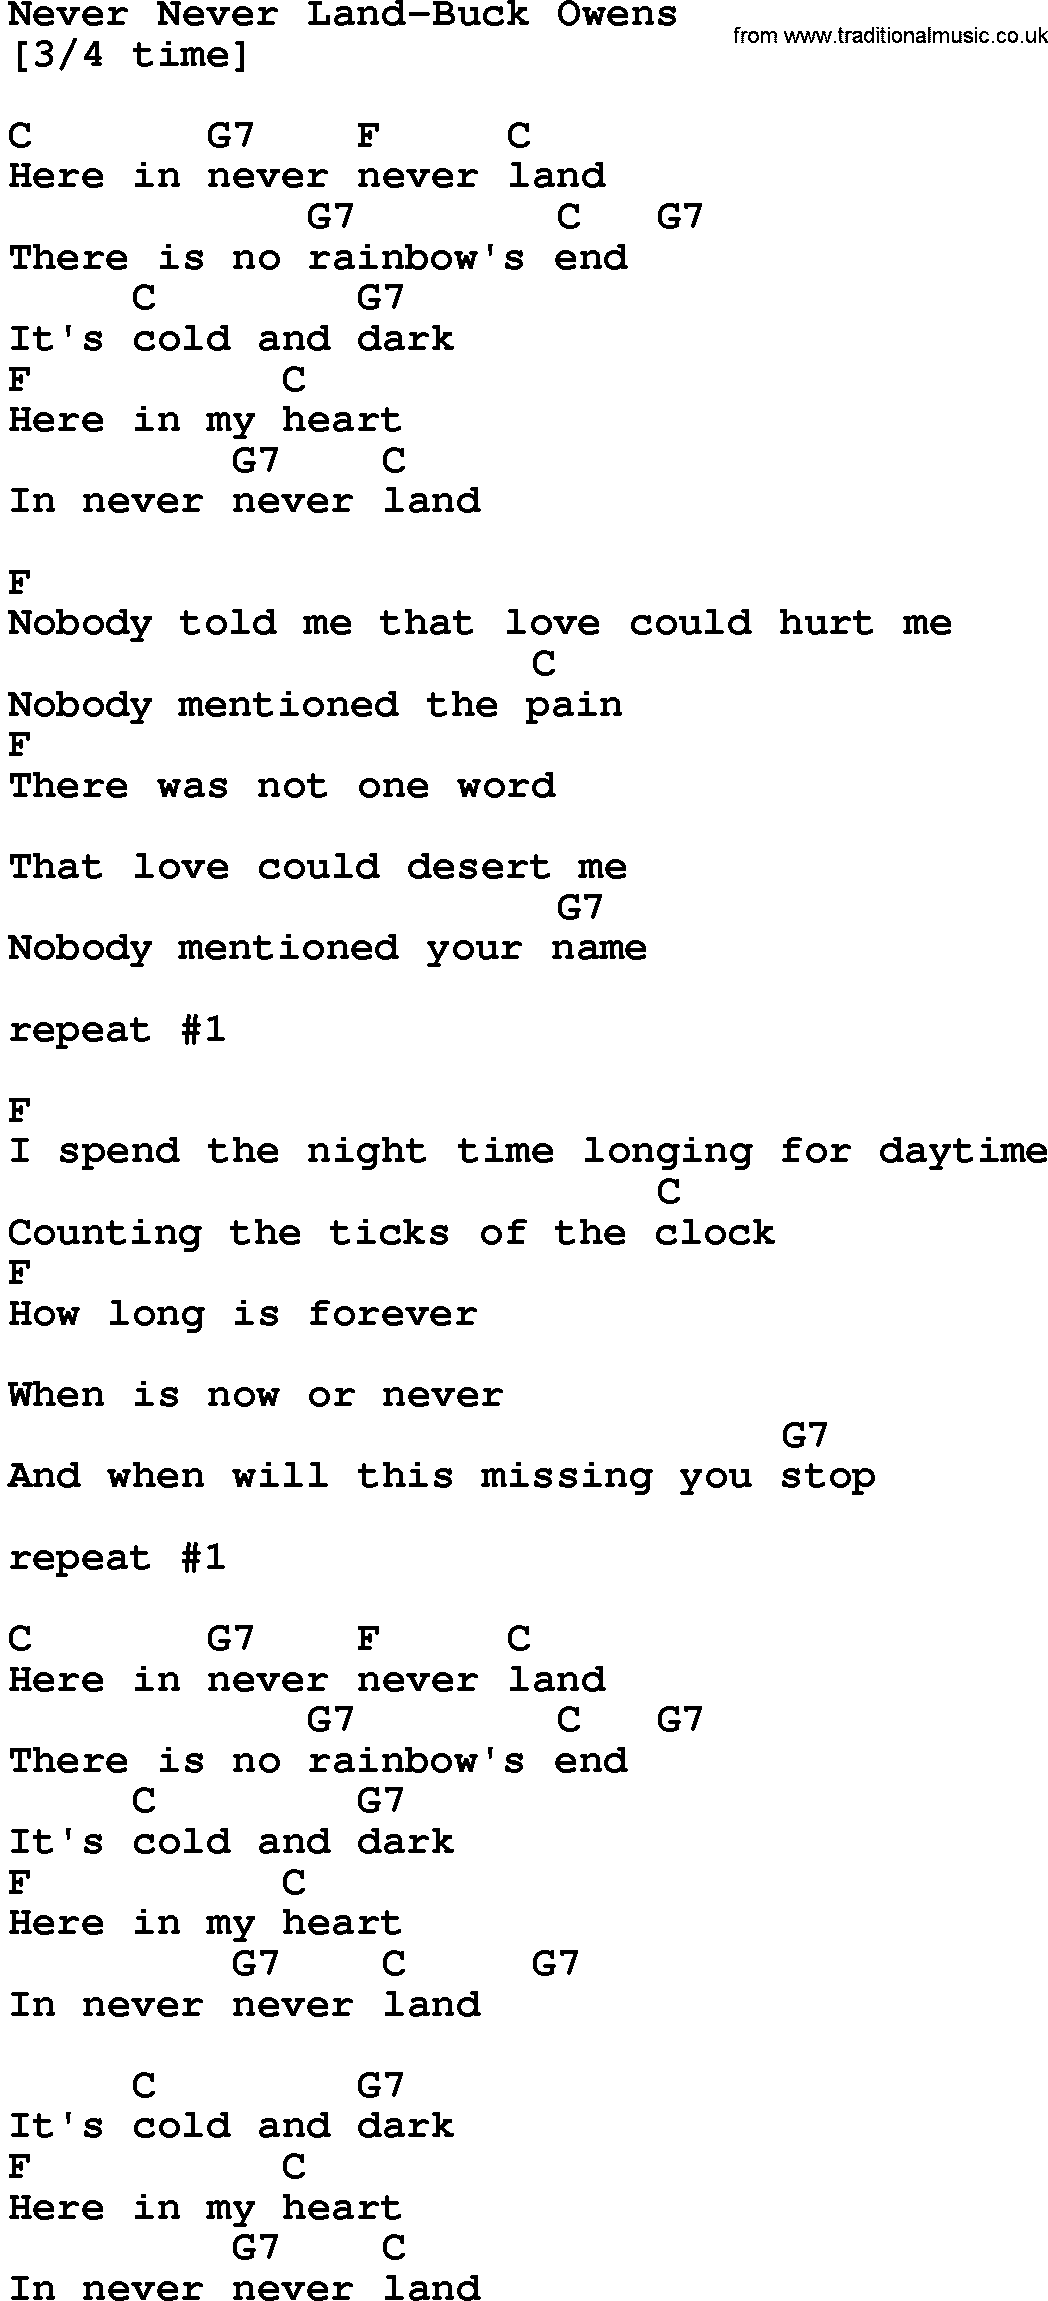 Country music song: Never Never Land-Buck Owens lyrics and chords